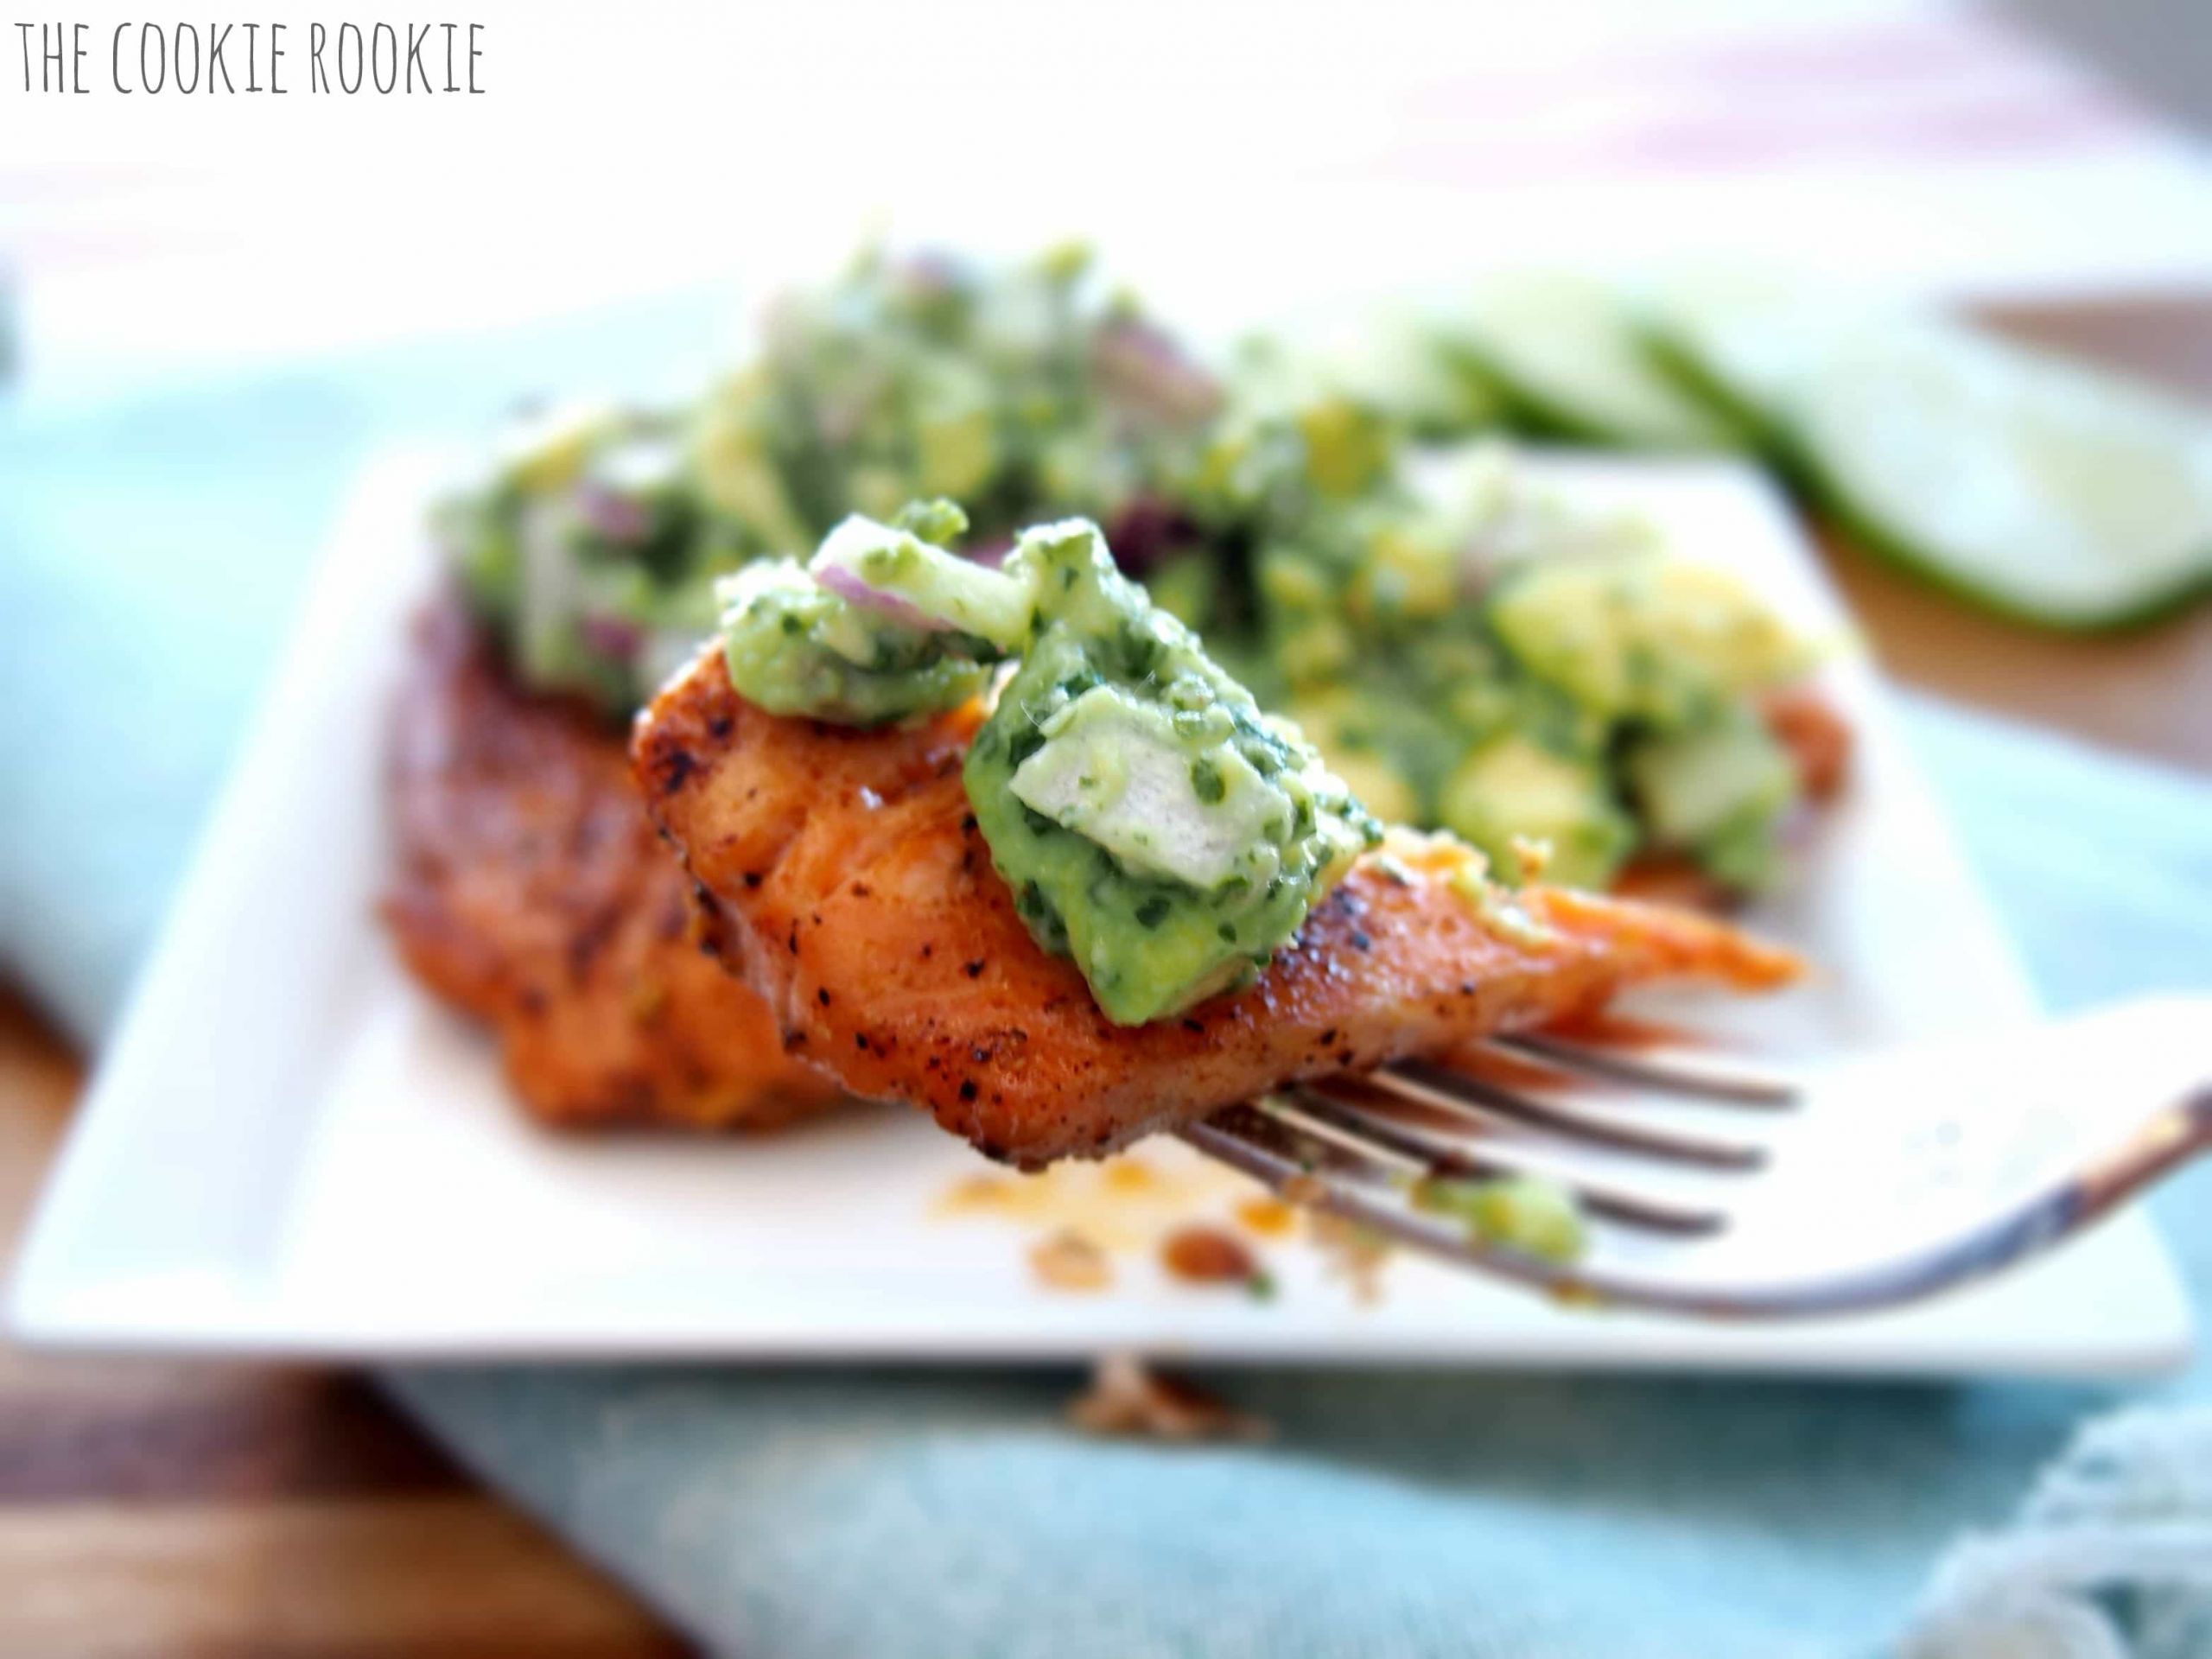 Salmon And Avocado Recipes
 Whole30 Grilled Salmon with Avocado Salsa Recipe The